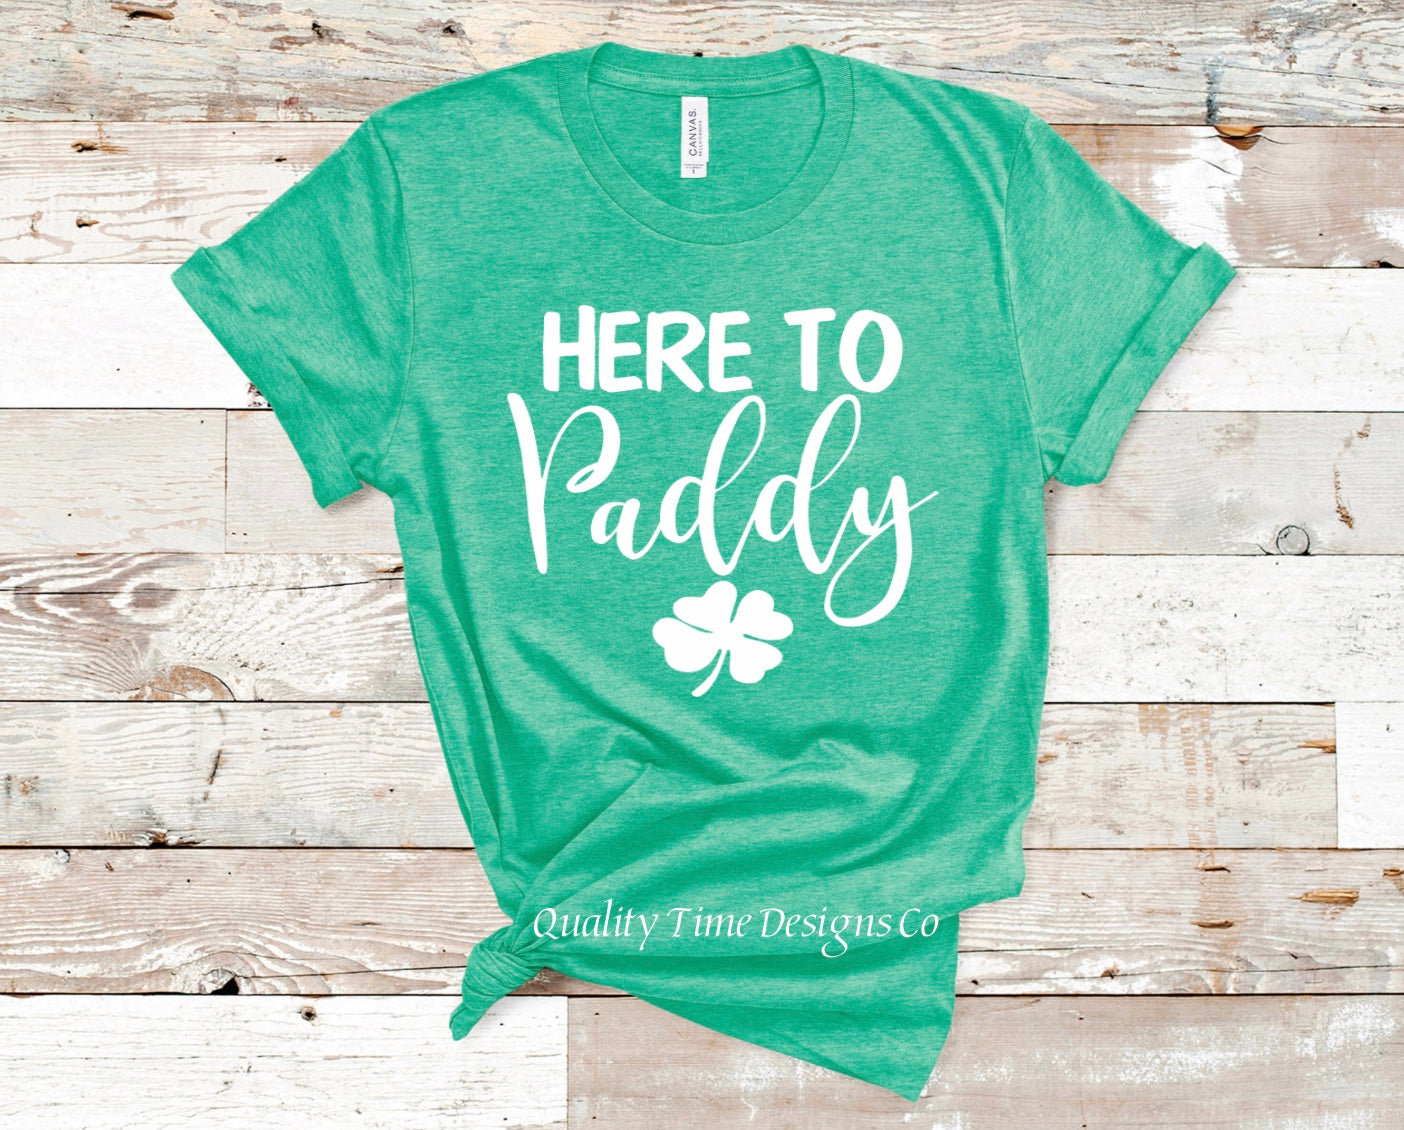 Here to paddy st Patrick’s day green t shirt